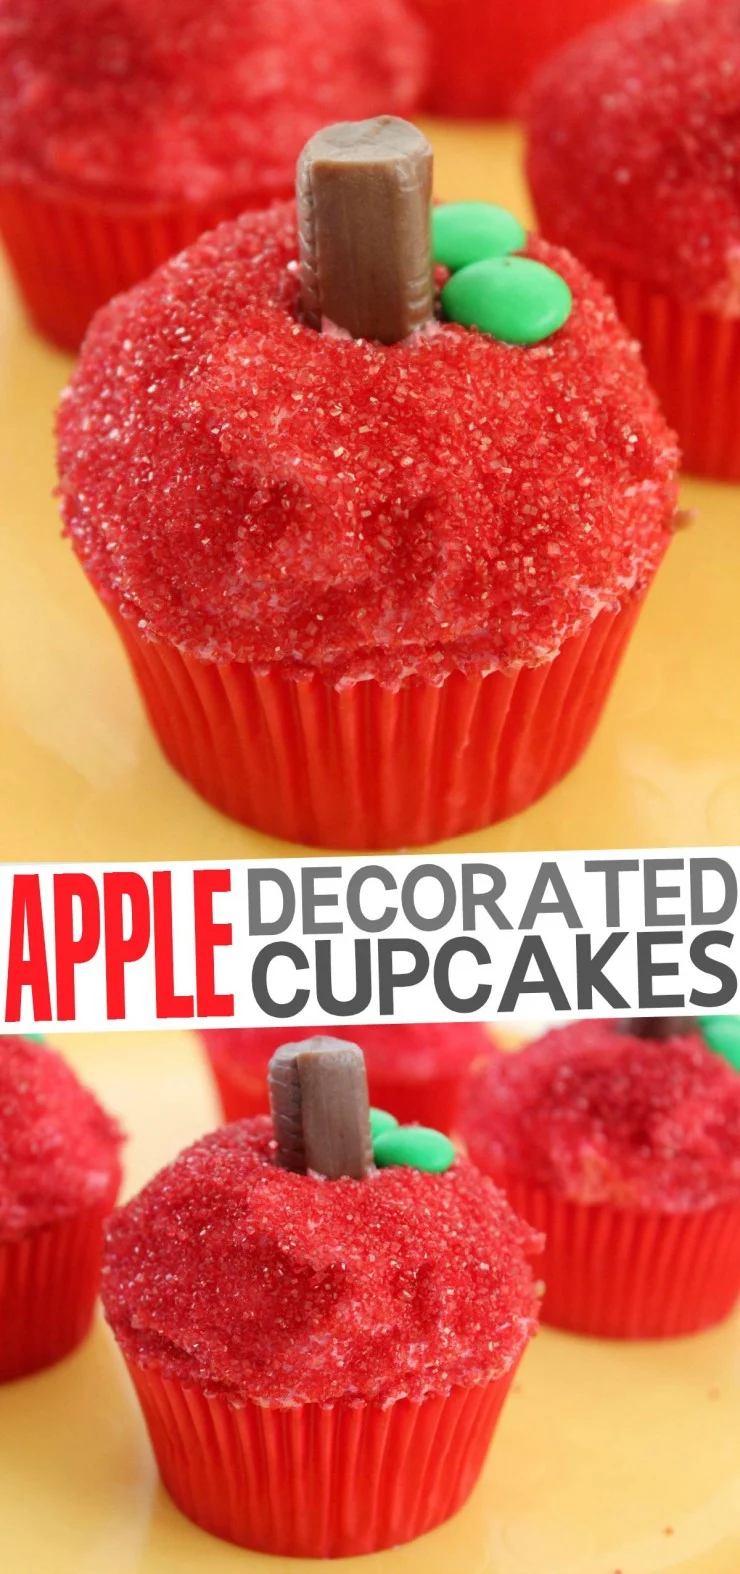 These Apple Decorated Cupcakes are an absolutely adorable back to school teacher appreciation gift or for a fun autumn party!